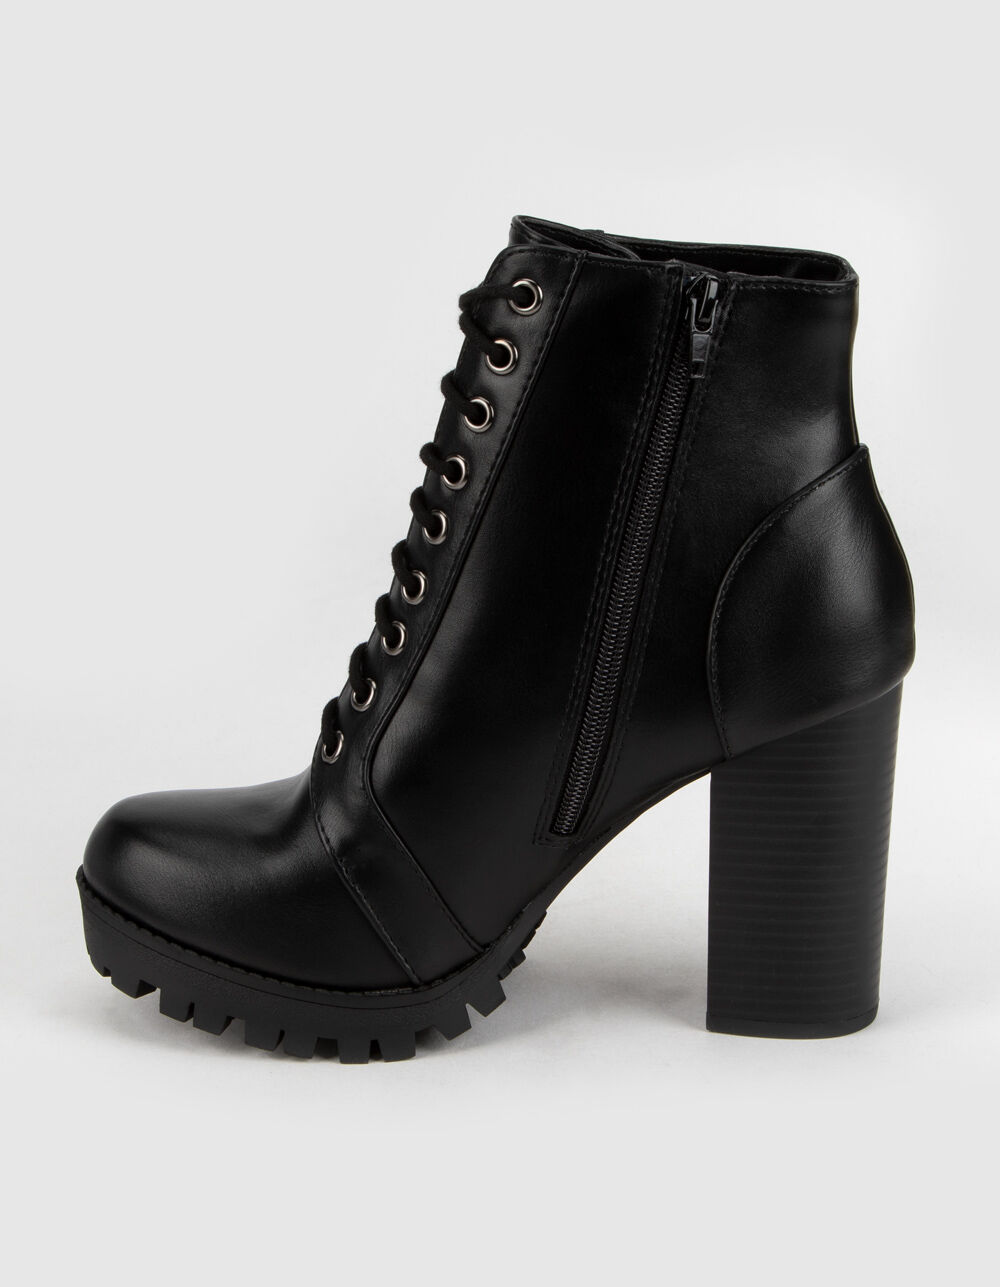 SODA Lace Up Womens Heeled Combat Boots - BLACK | Tillys